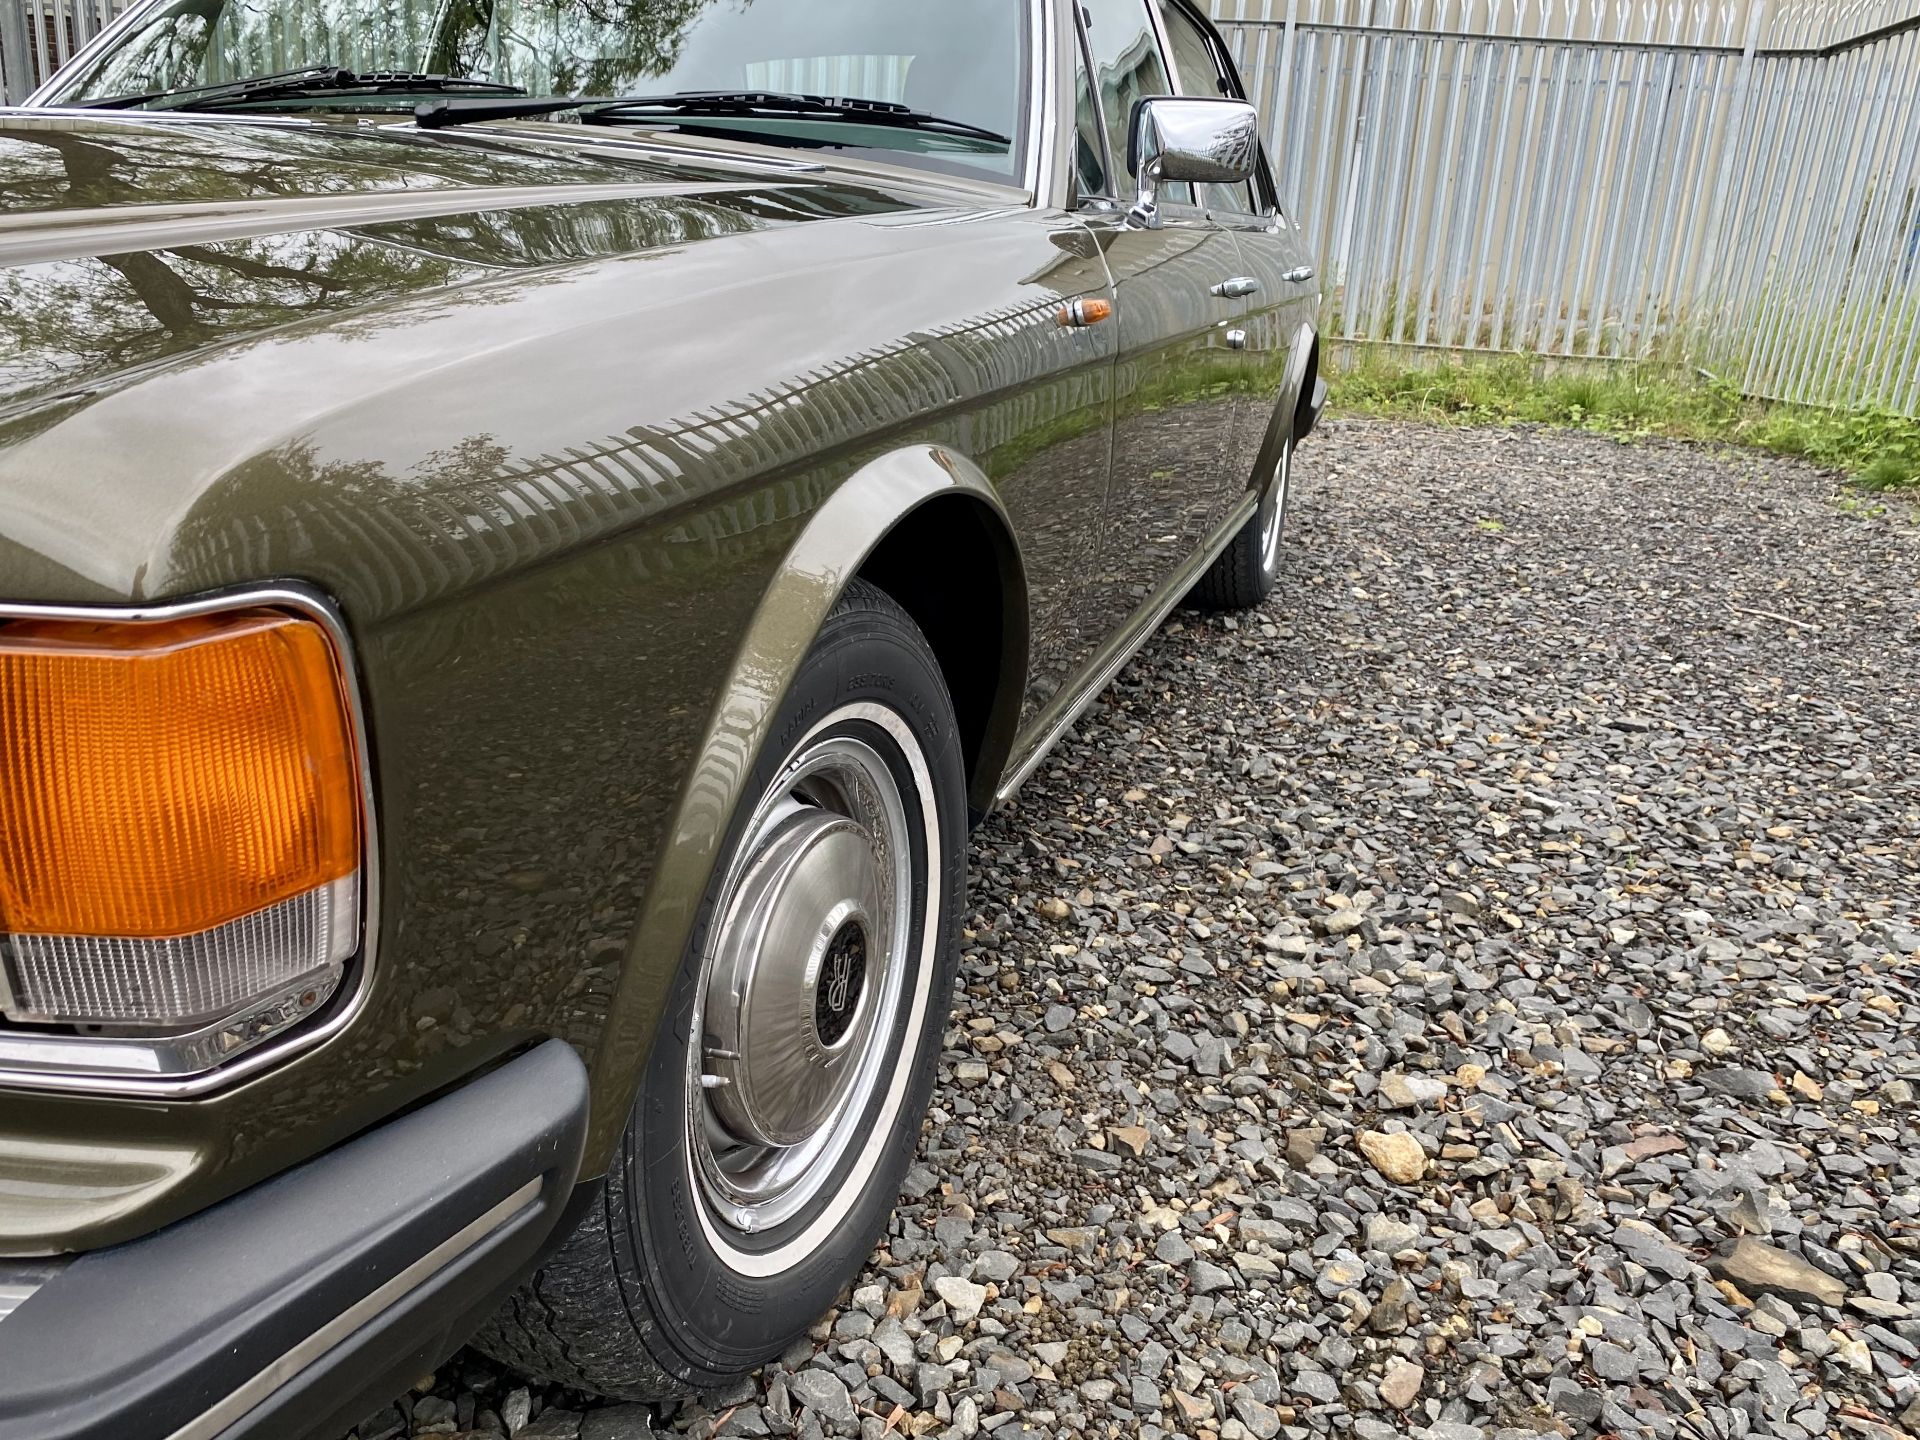 Rolls Royce Silver Spur - Image 23 of 55